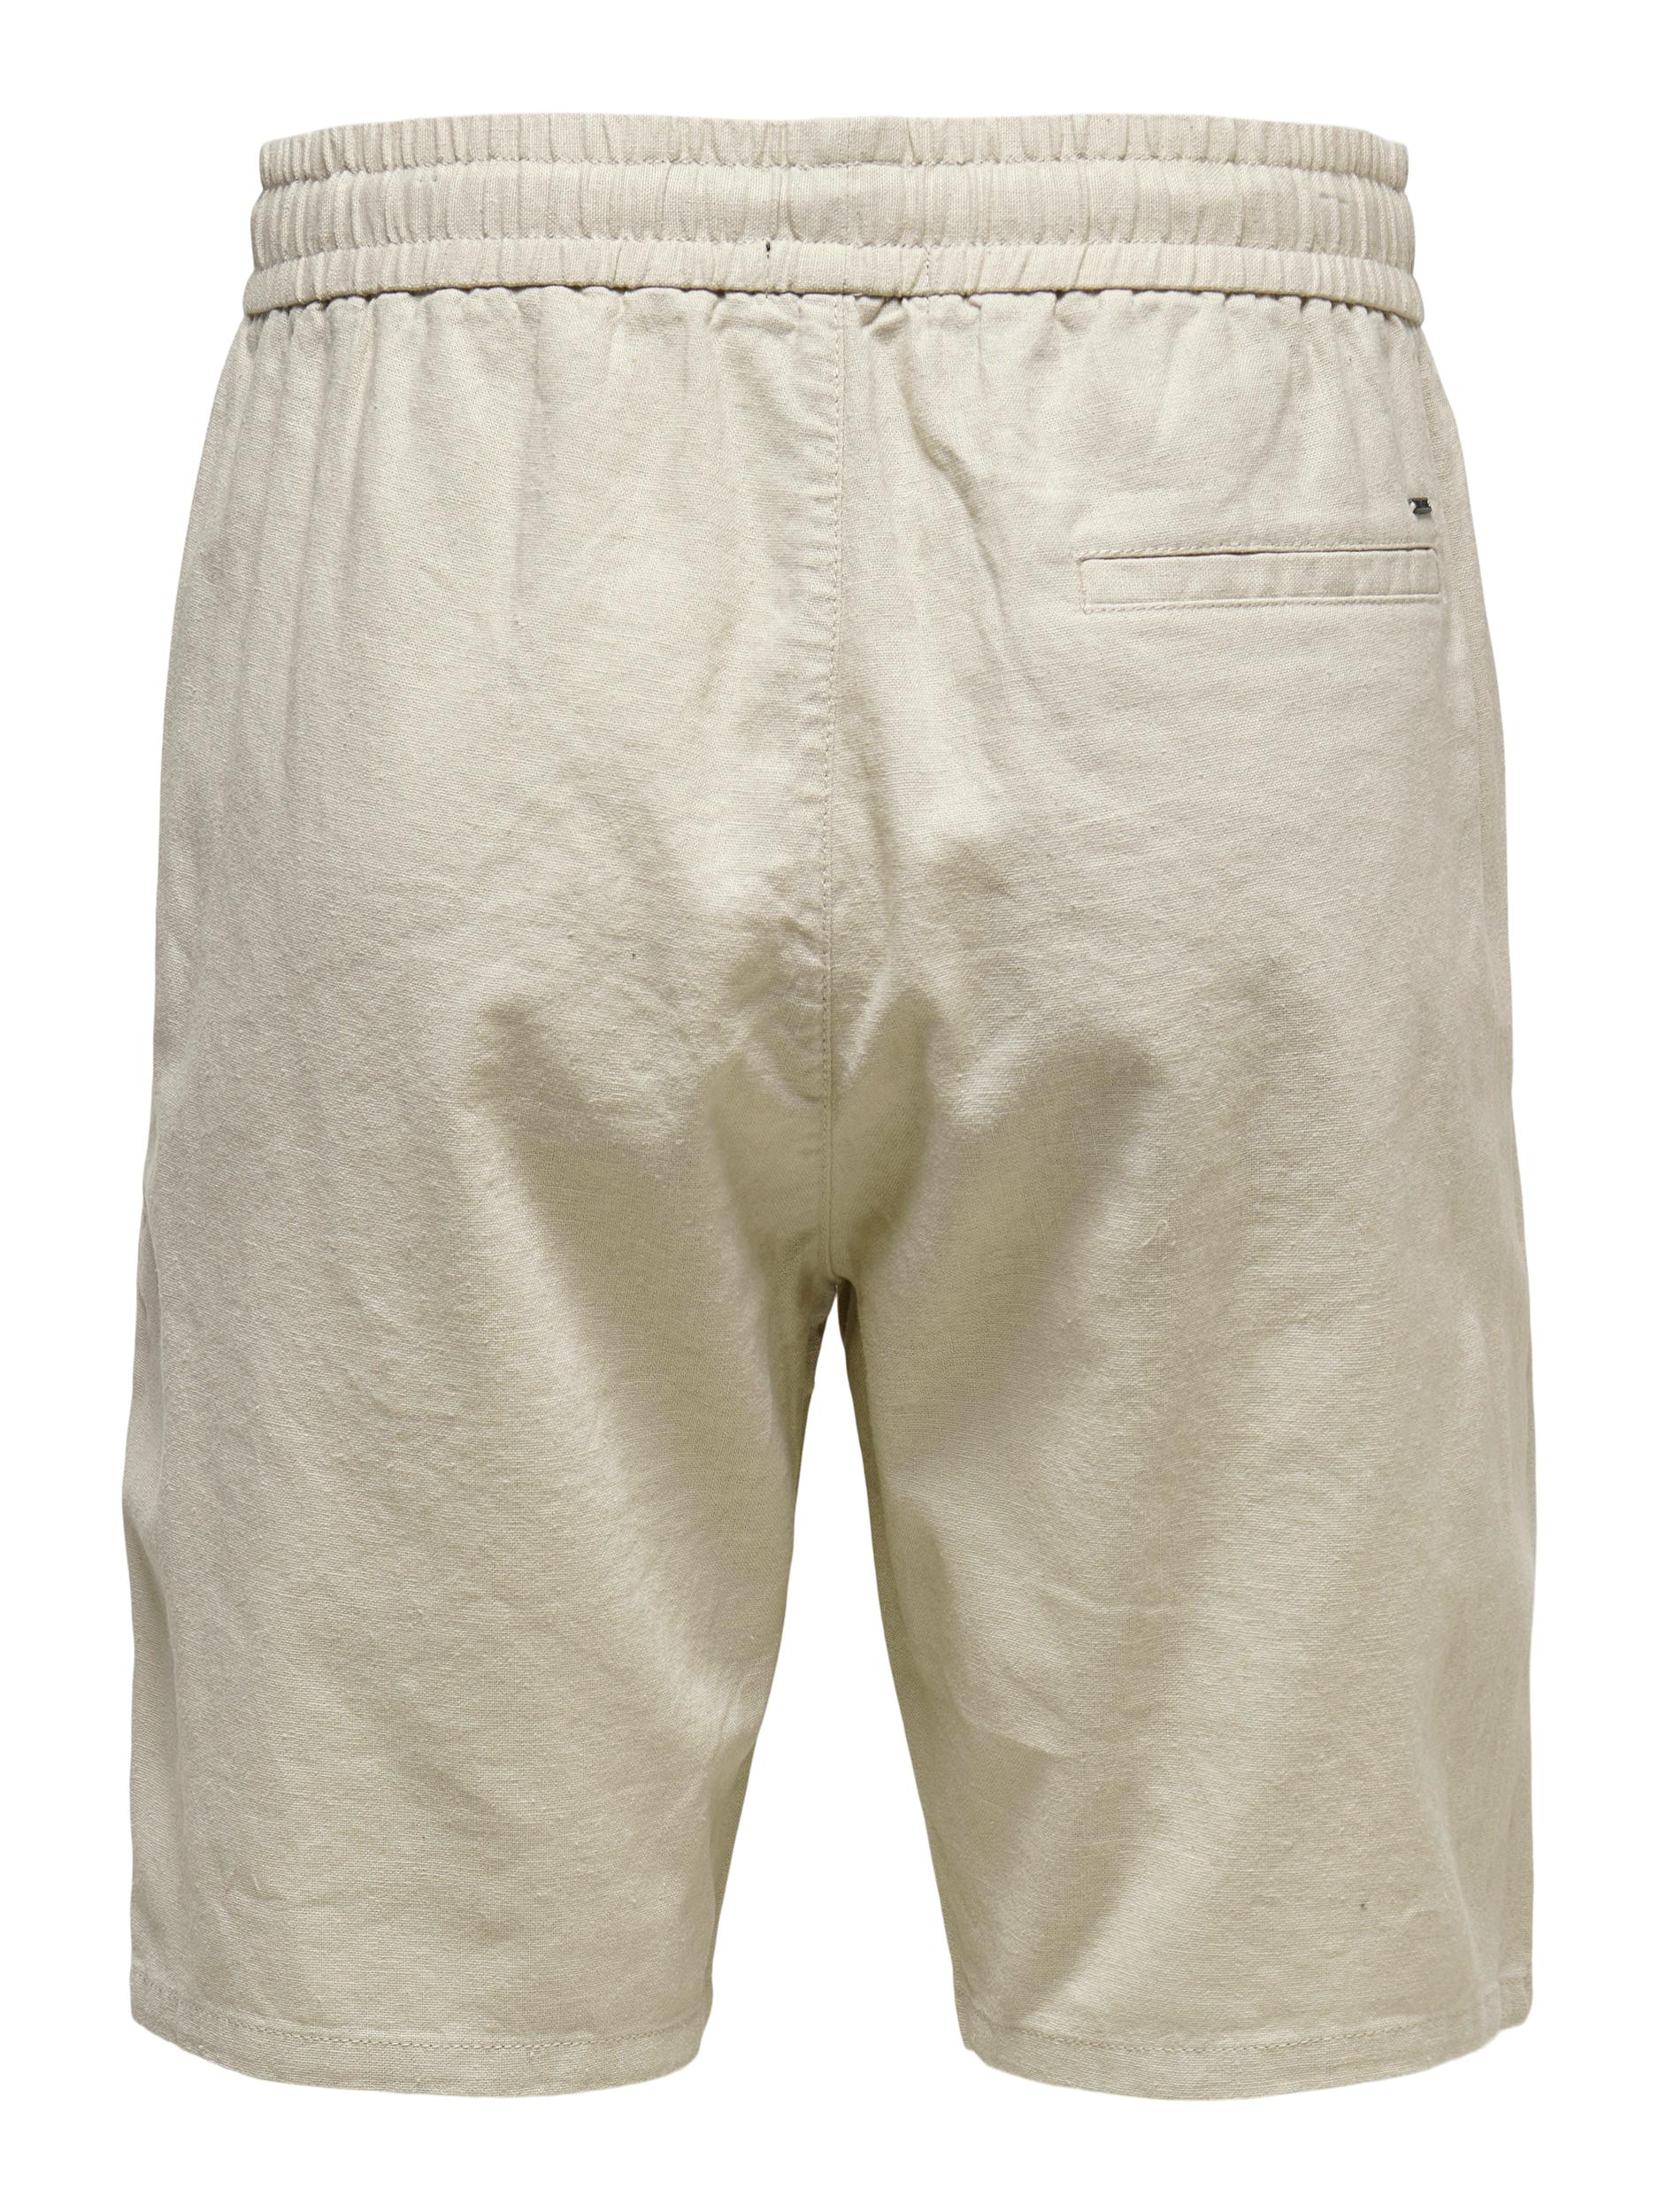 ONLY Linus Shorts, Silver Lining, M